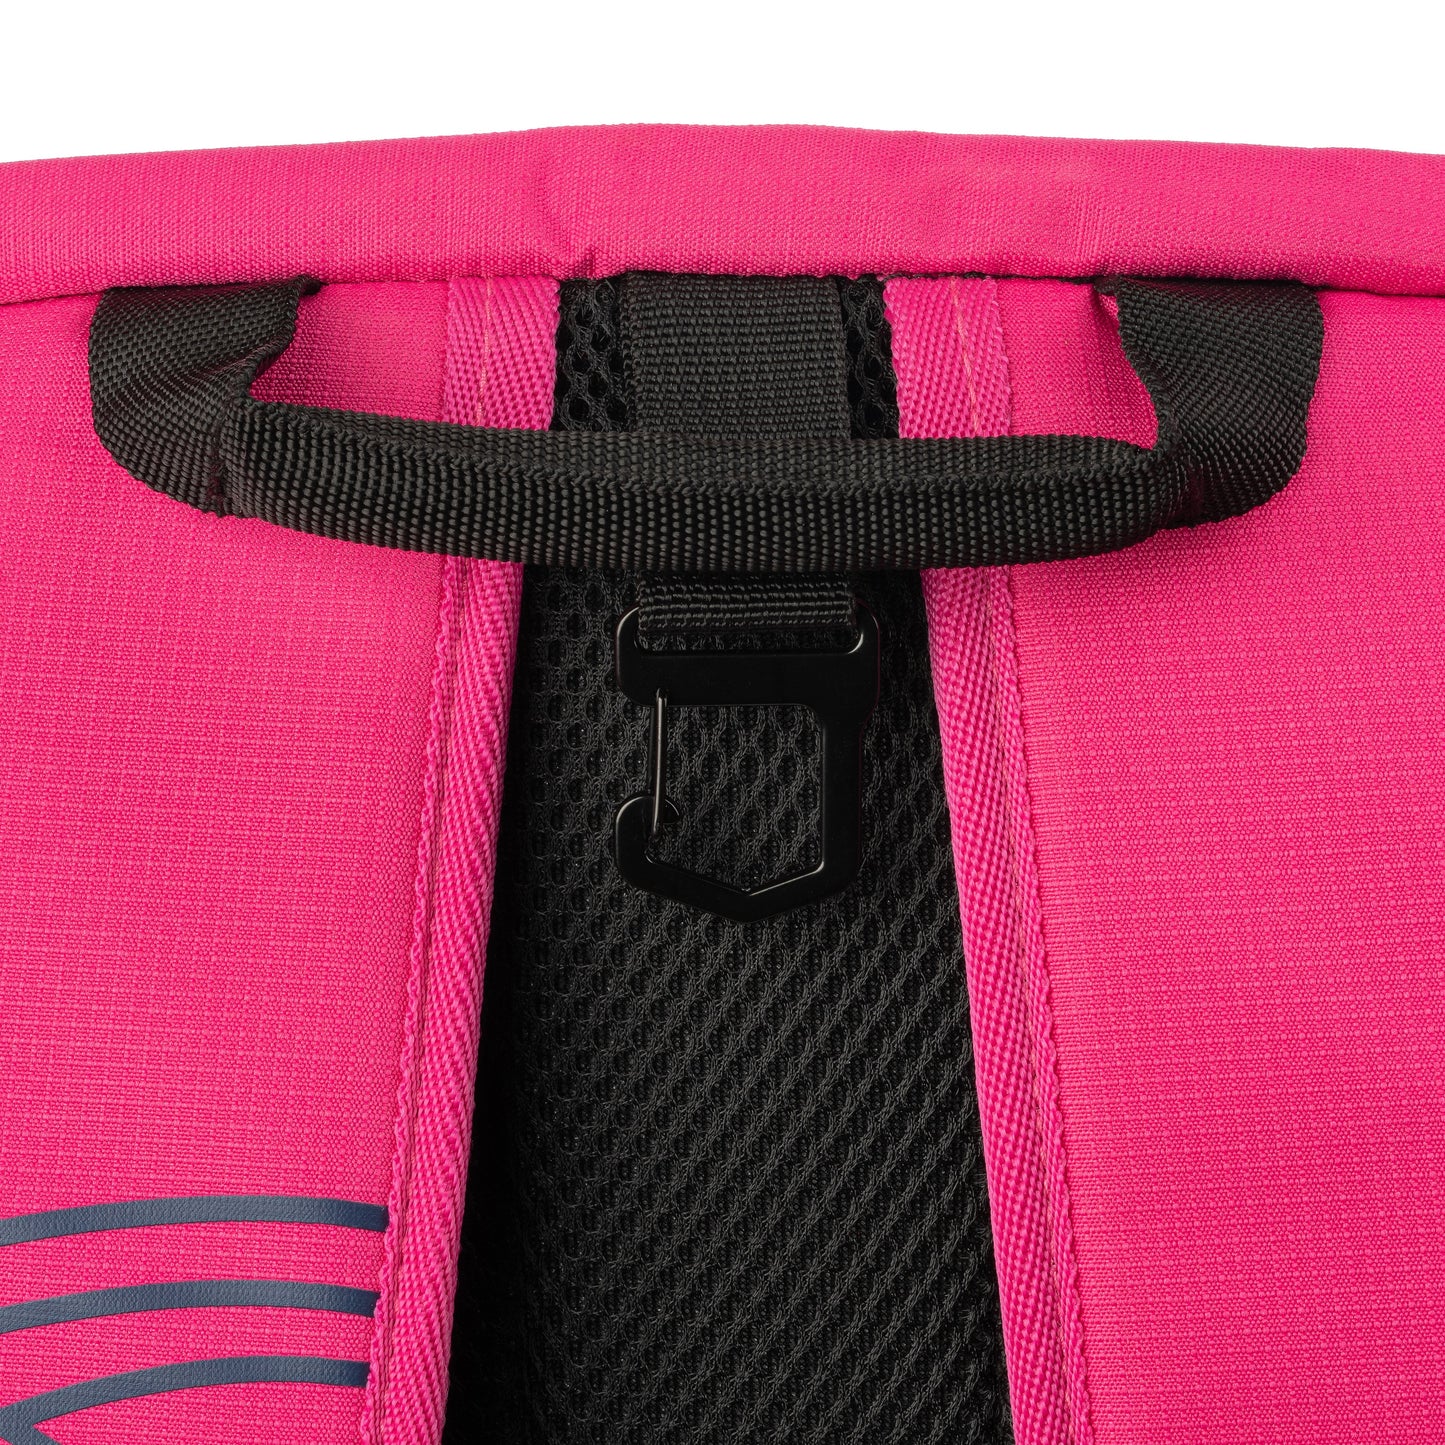 A close up of a Selkirk Core Series Team Backpack Pickleball Bag with a black zipper.